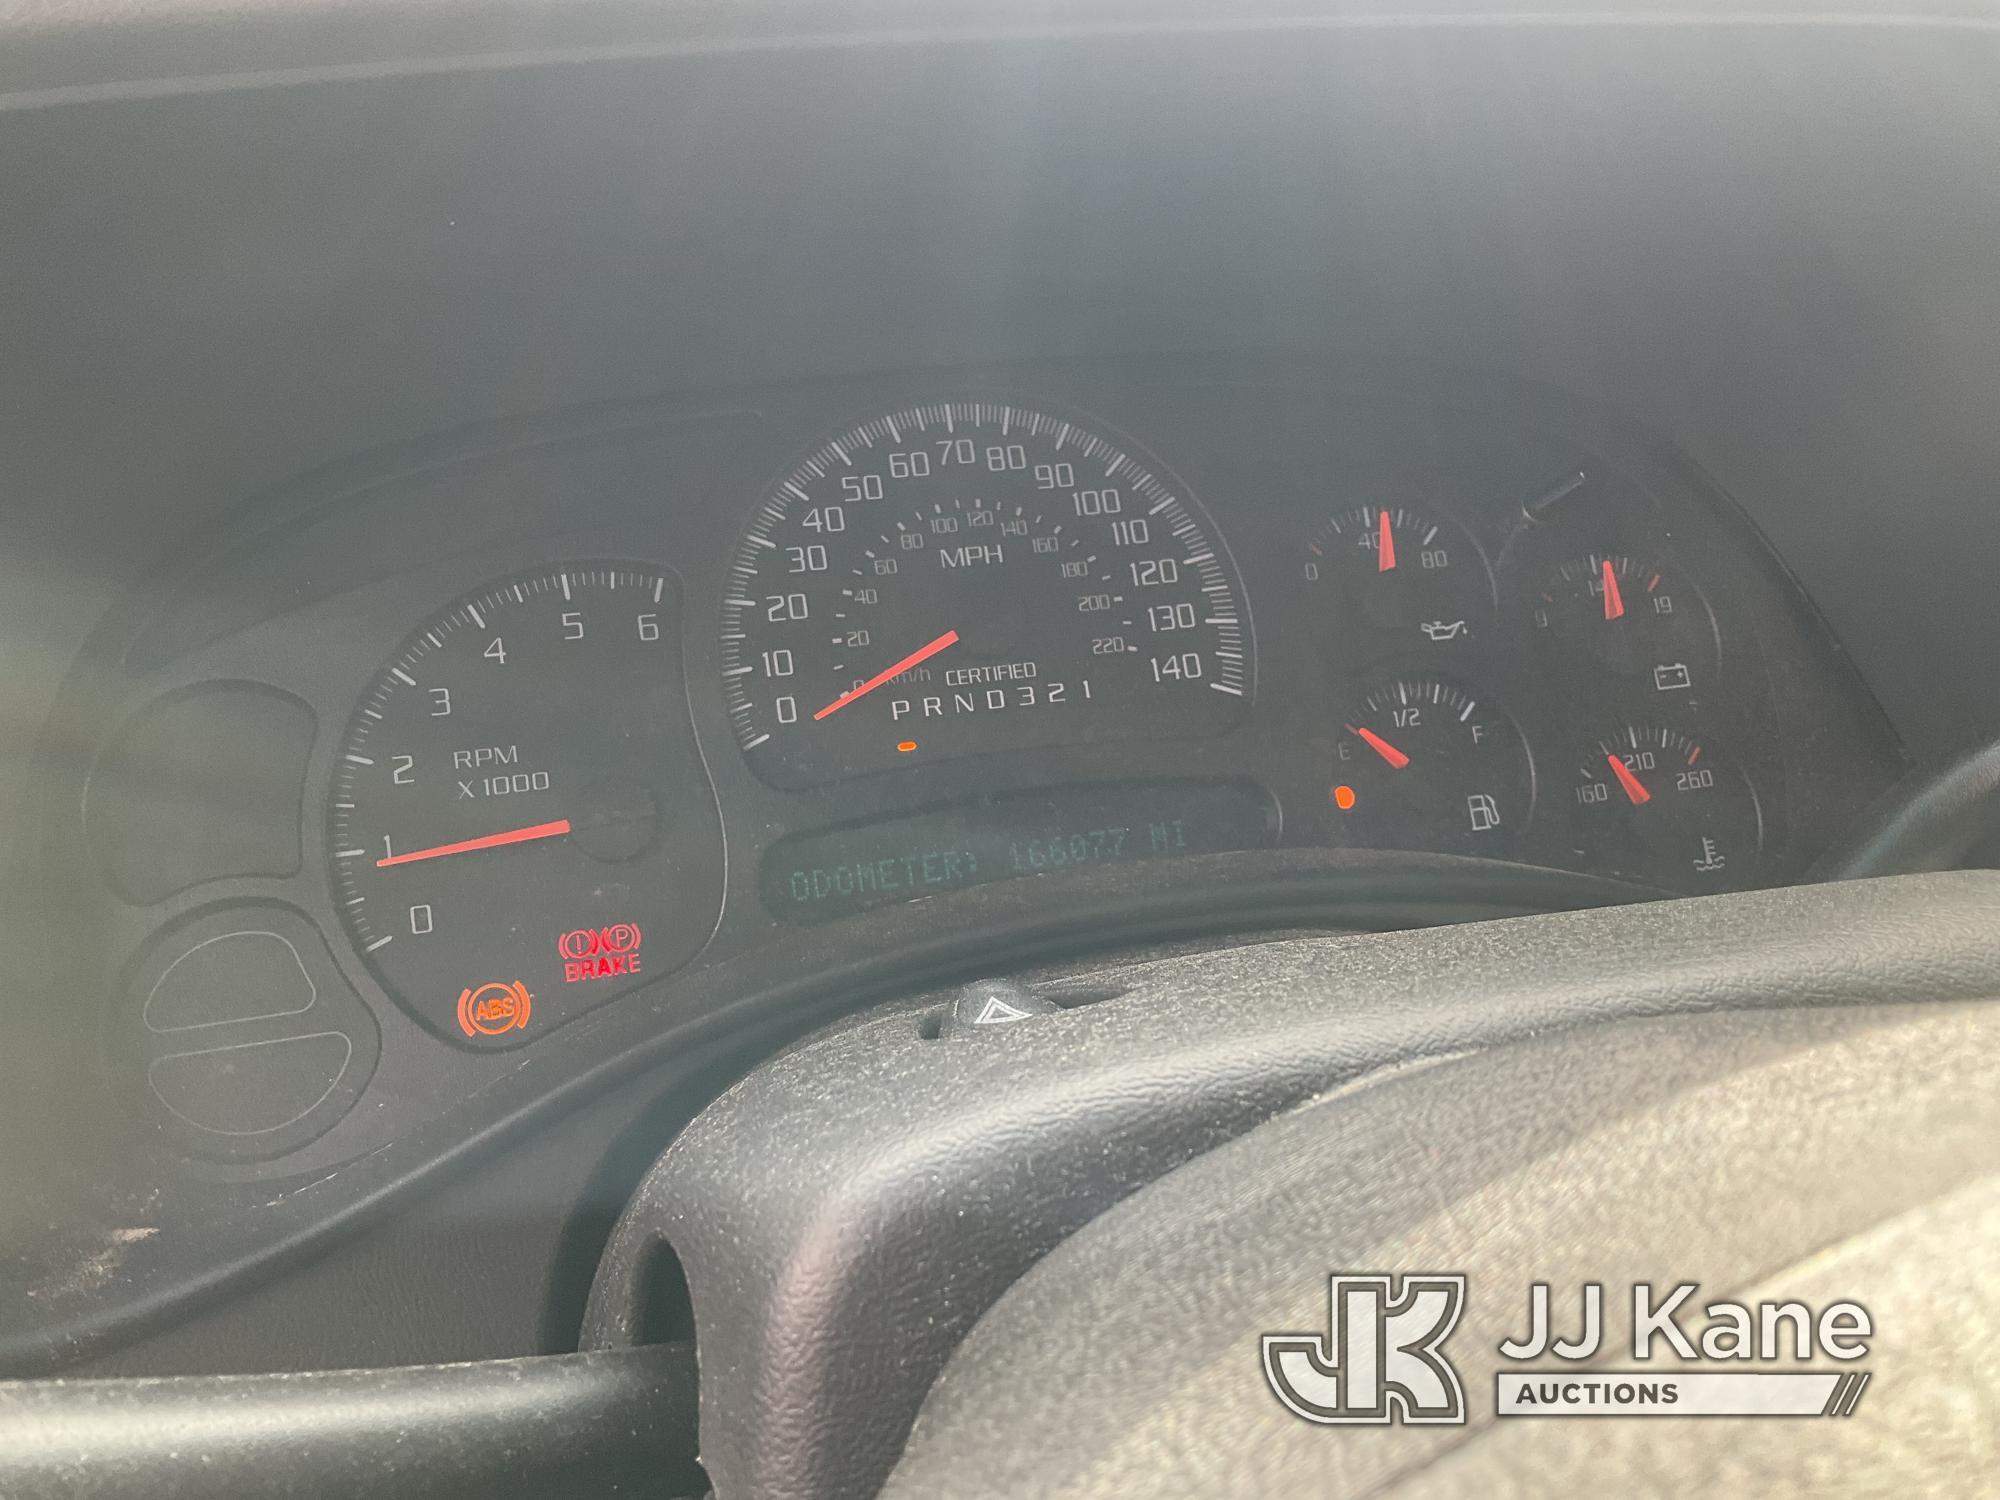 (Jurupa Valley, CA) 2006 Chevrolet Tahoe Sport Utility Vehicle Runs, Does Not Move Damaged Front Bum